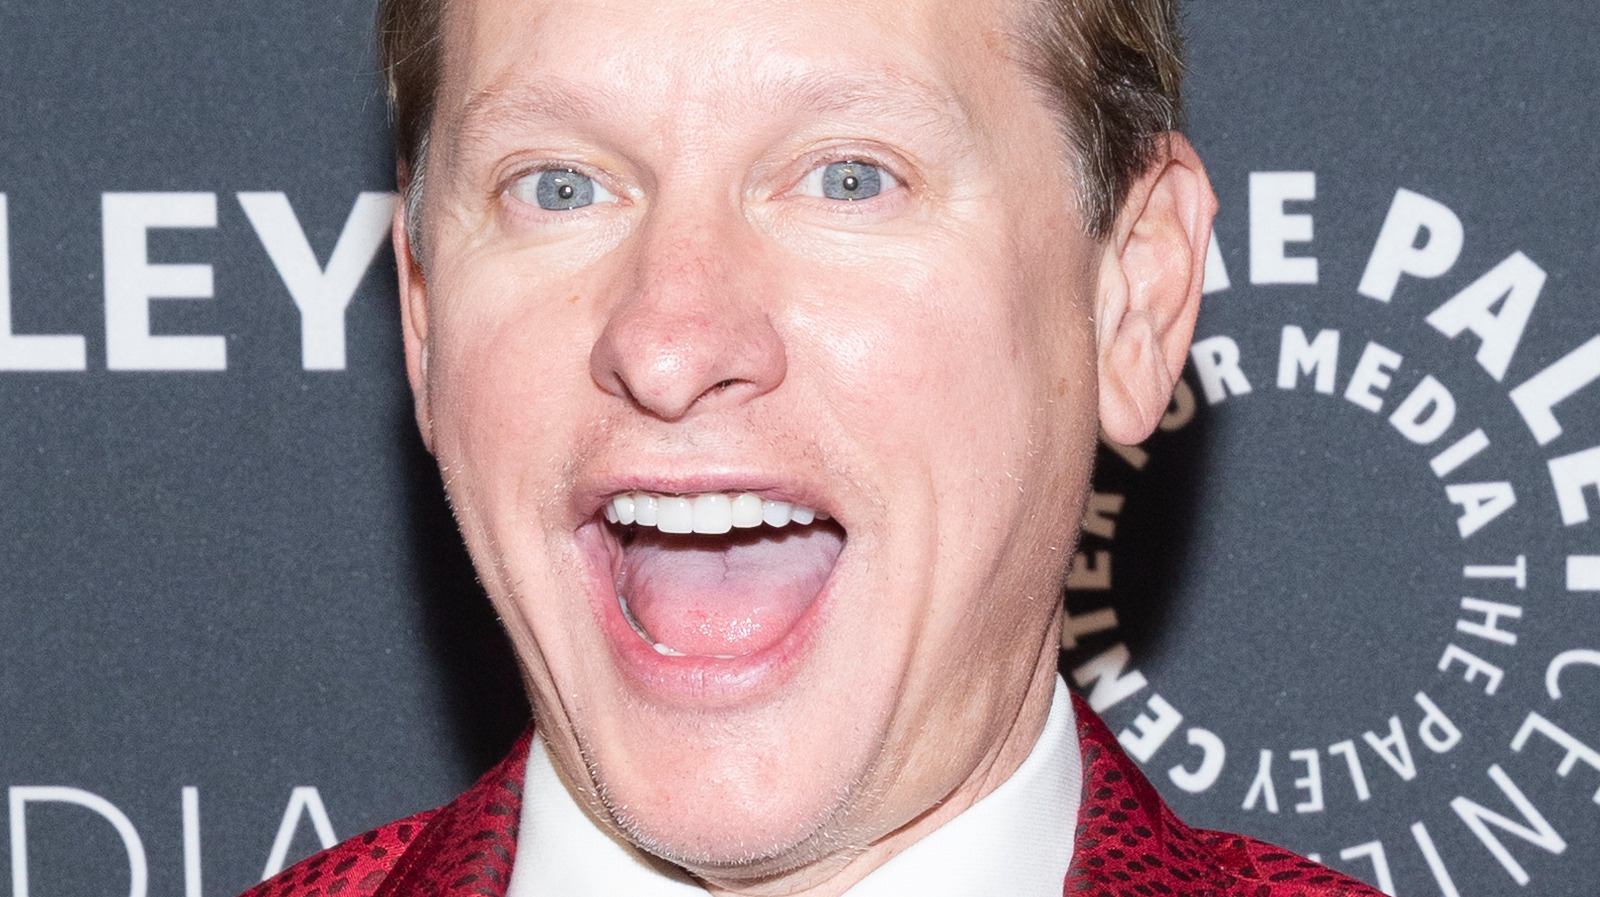 The Real Reason Carson Kressley Owes Shanna Moakler An Apology